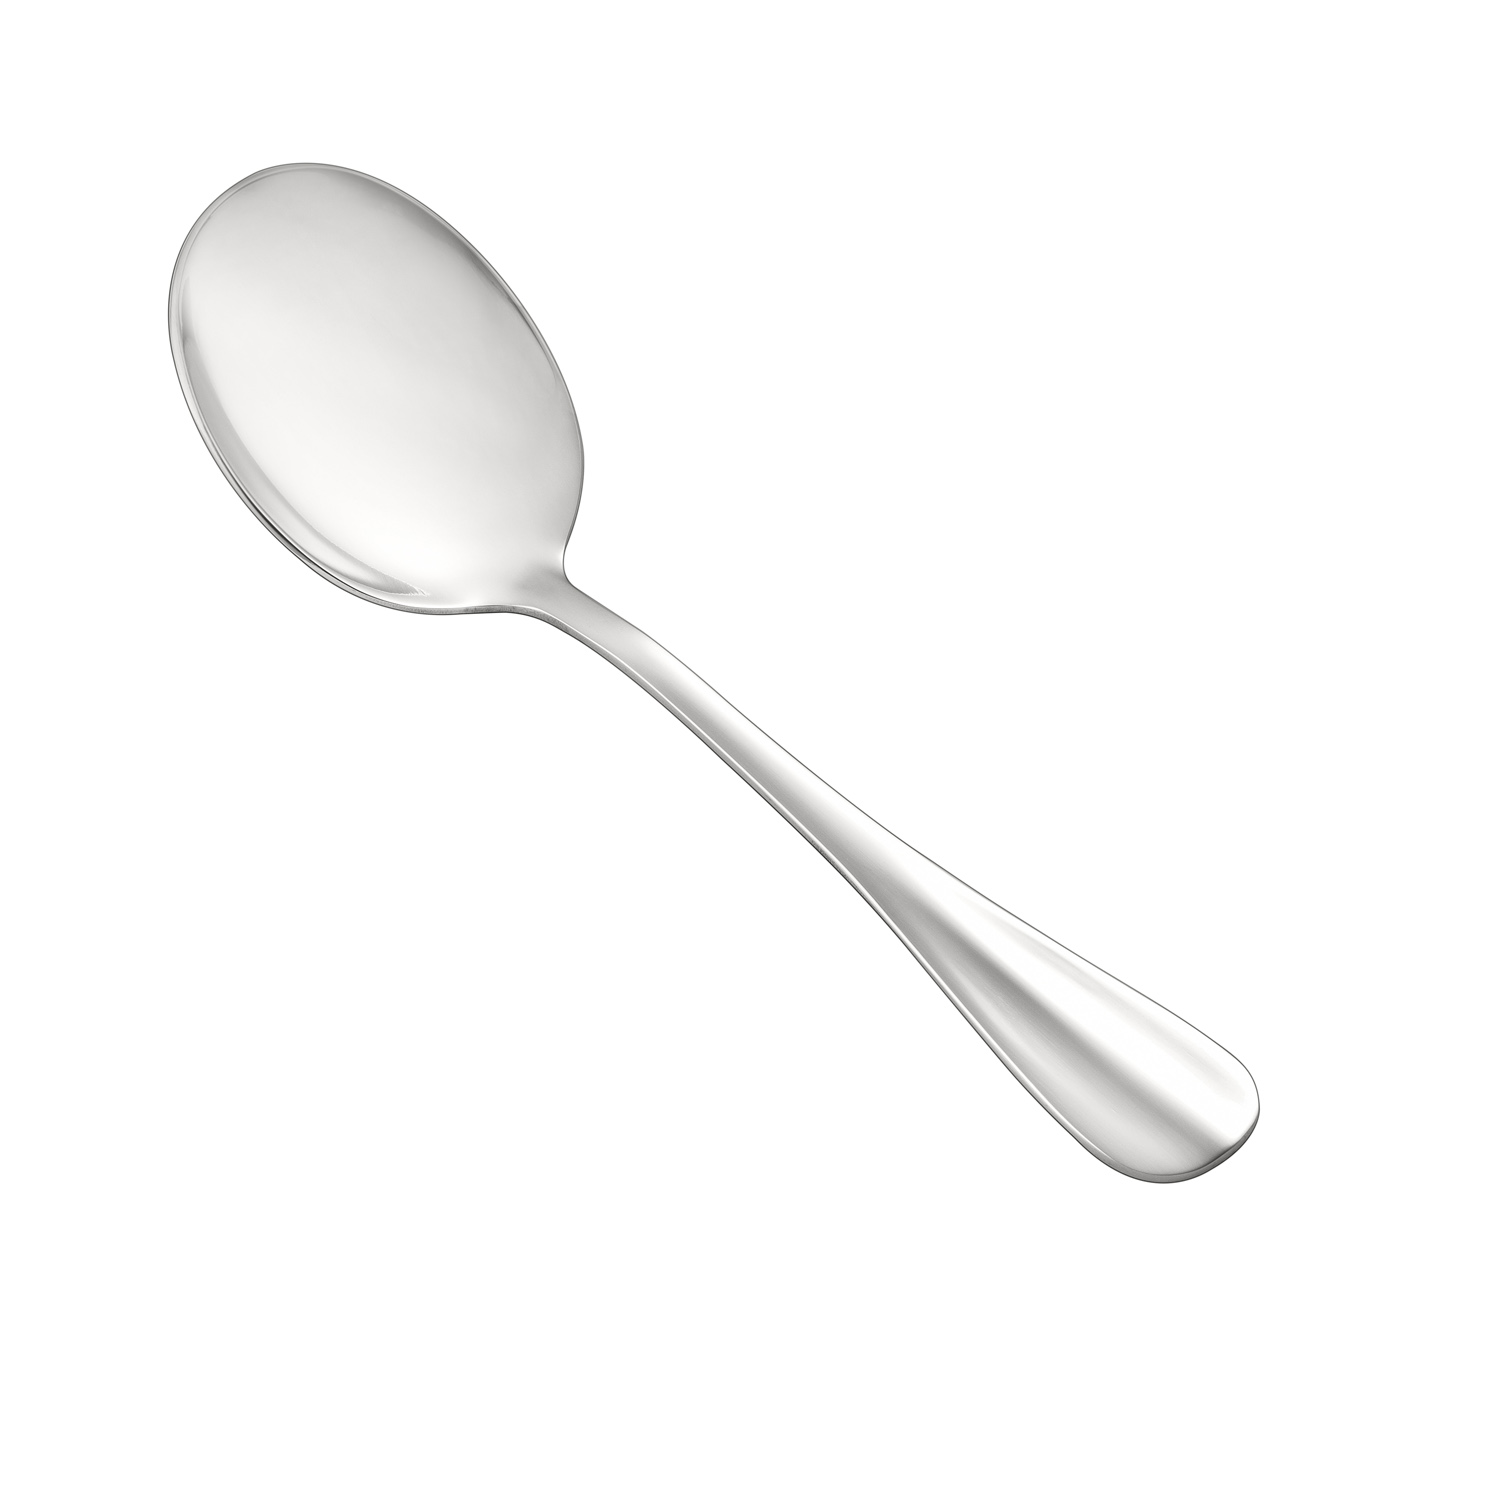 CAC China 8005-04 Exquisite Bouillon Spoon, Extra Heavyweight 18/8, 7"